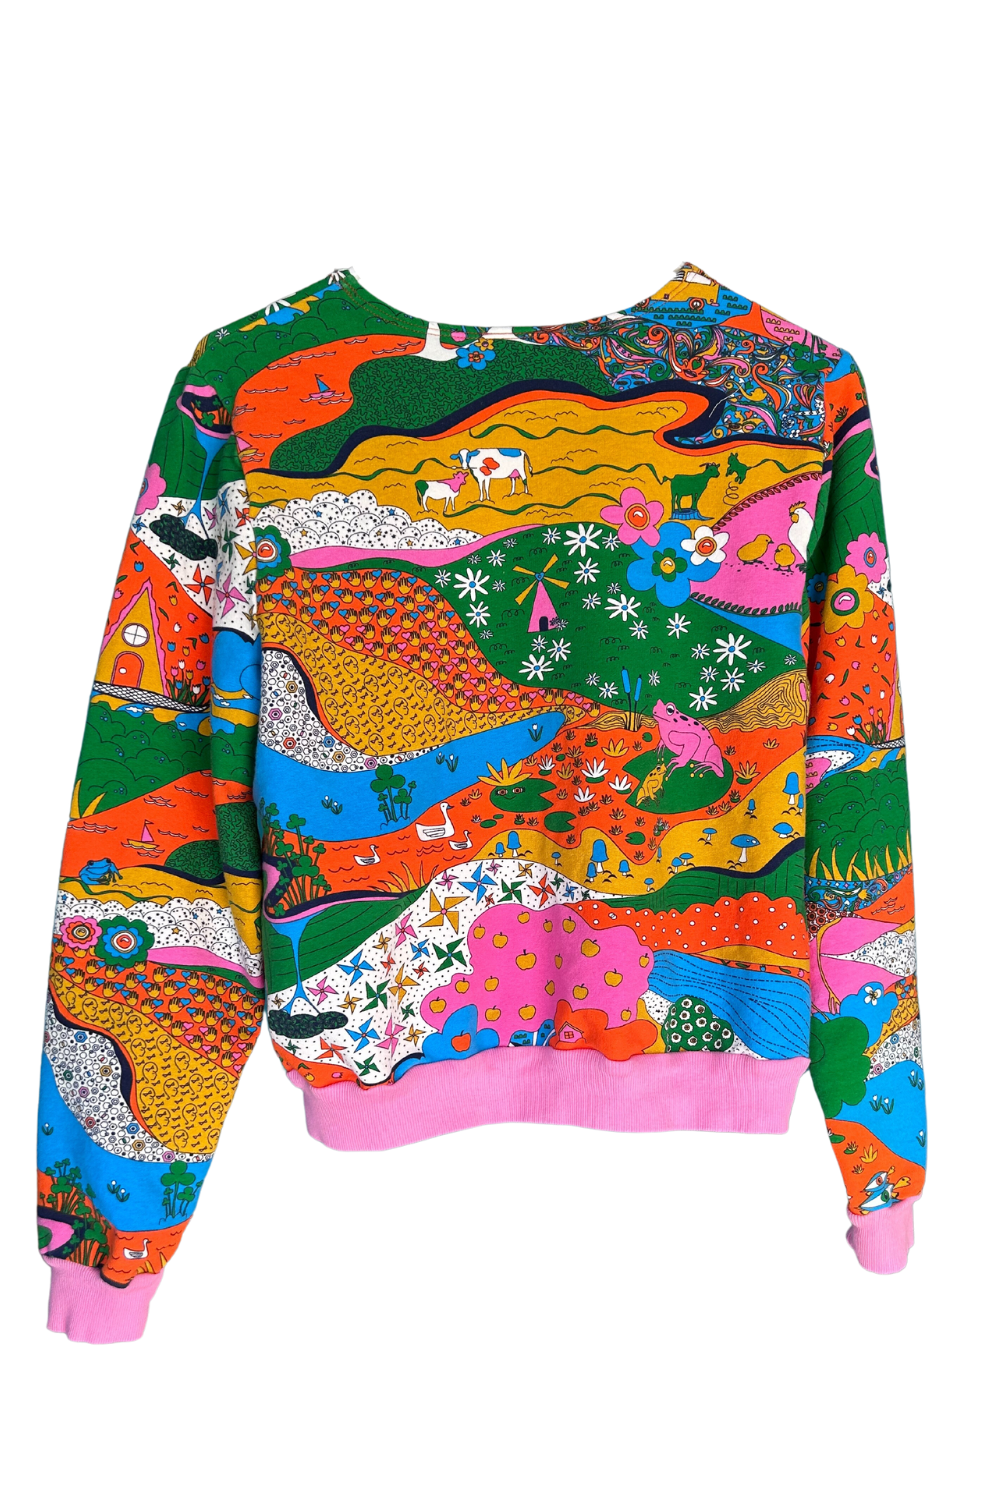 Back view of rainbow landscape print sweatshirt with pink ribbed cuffs